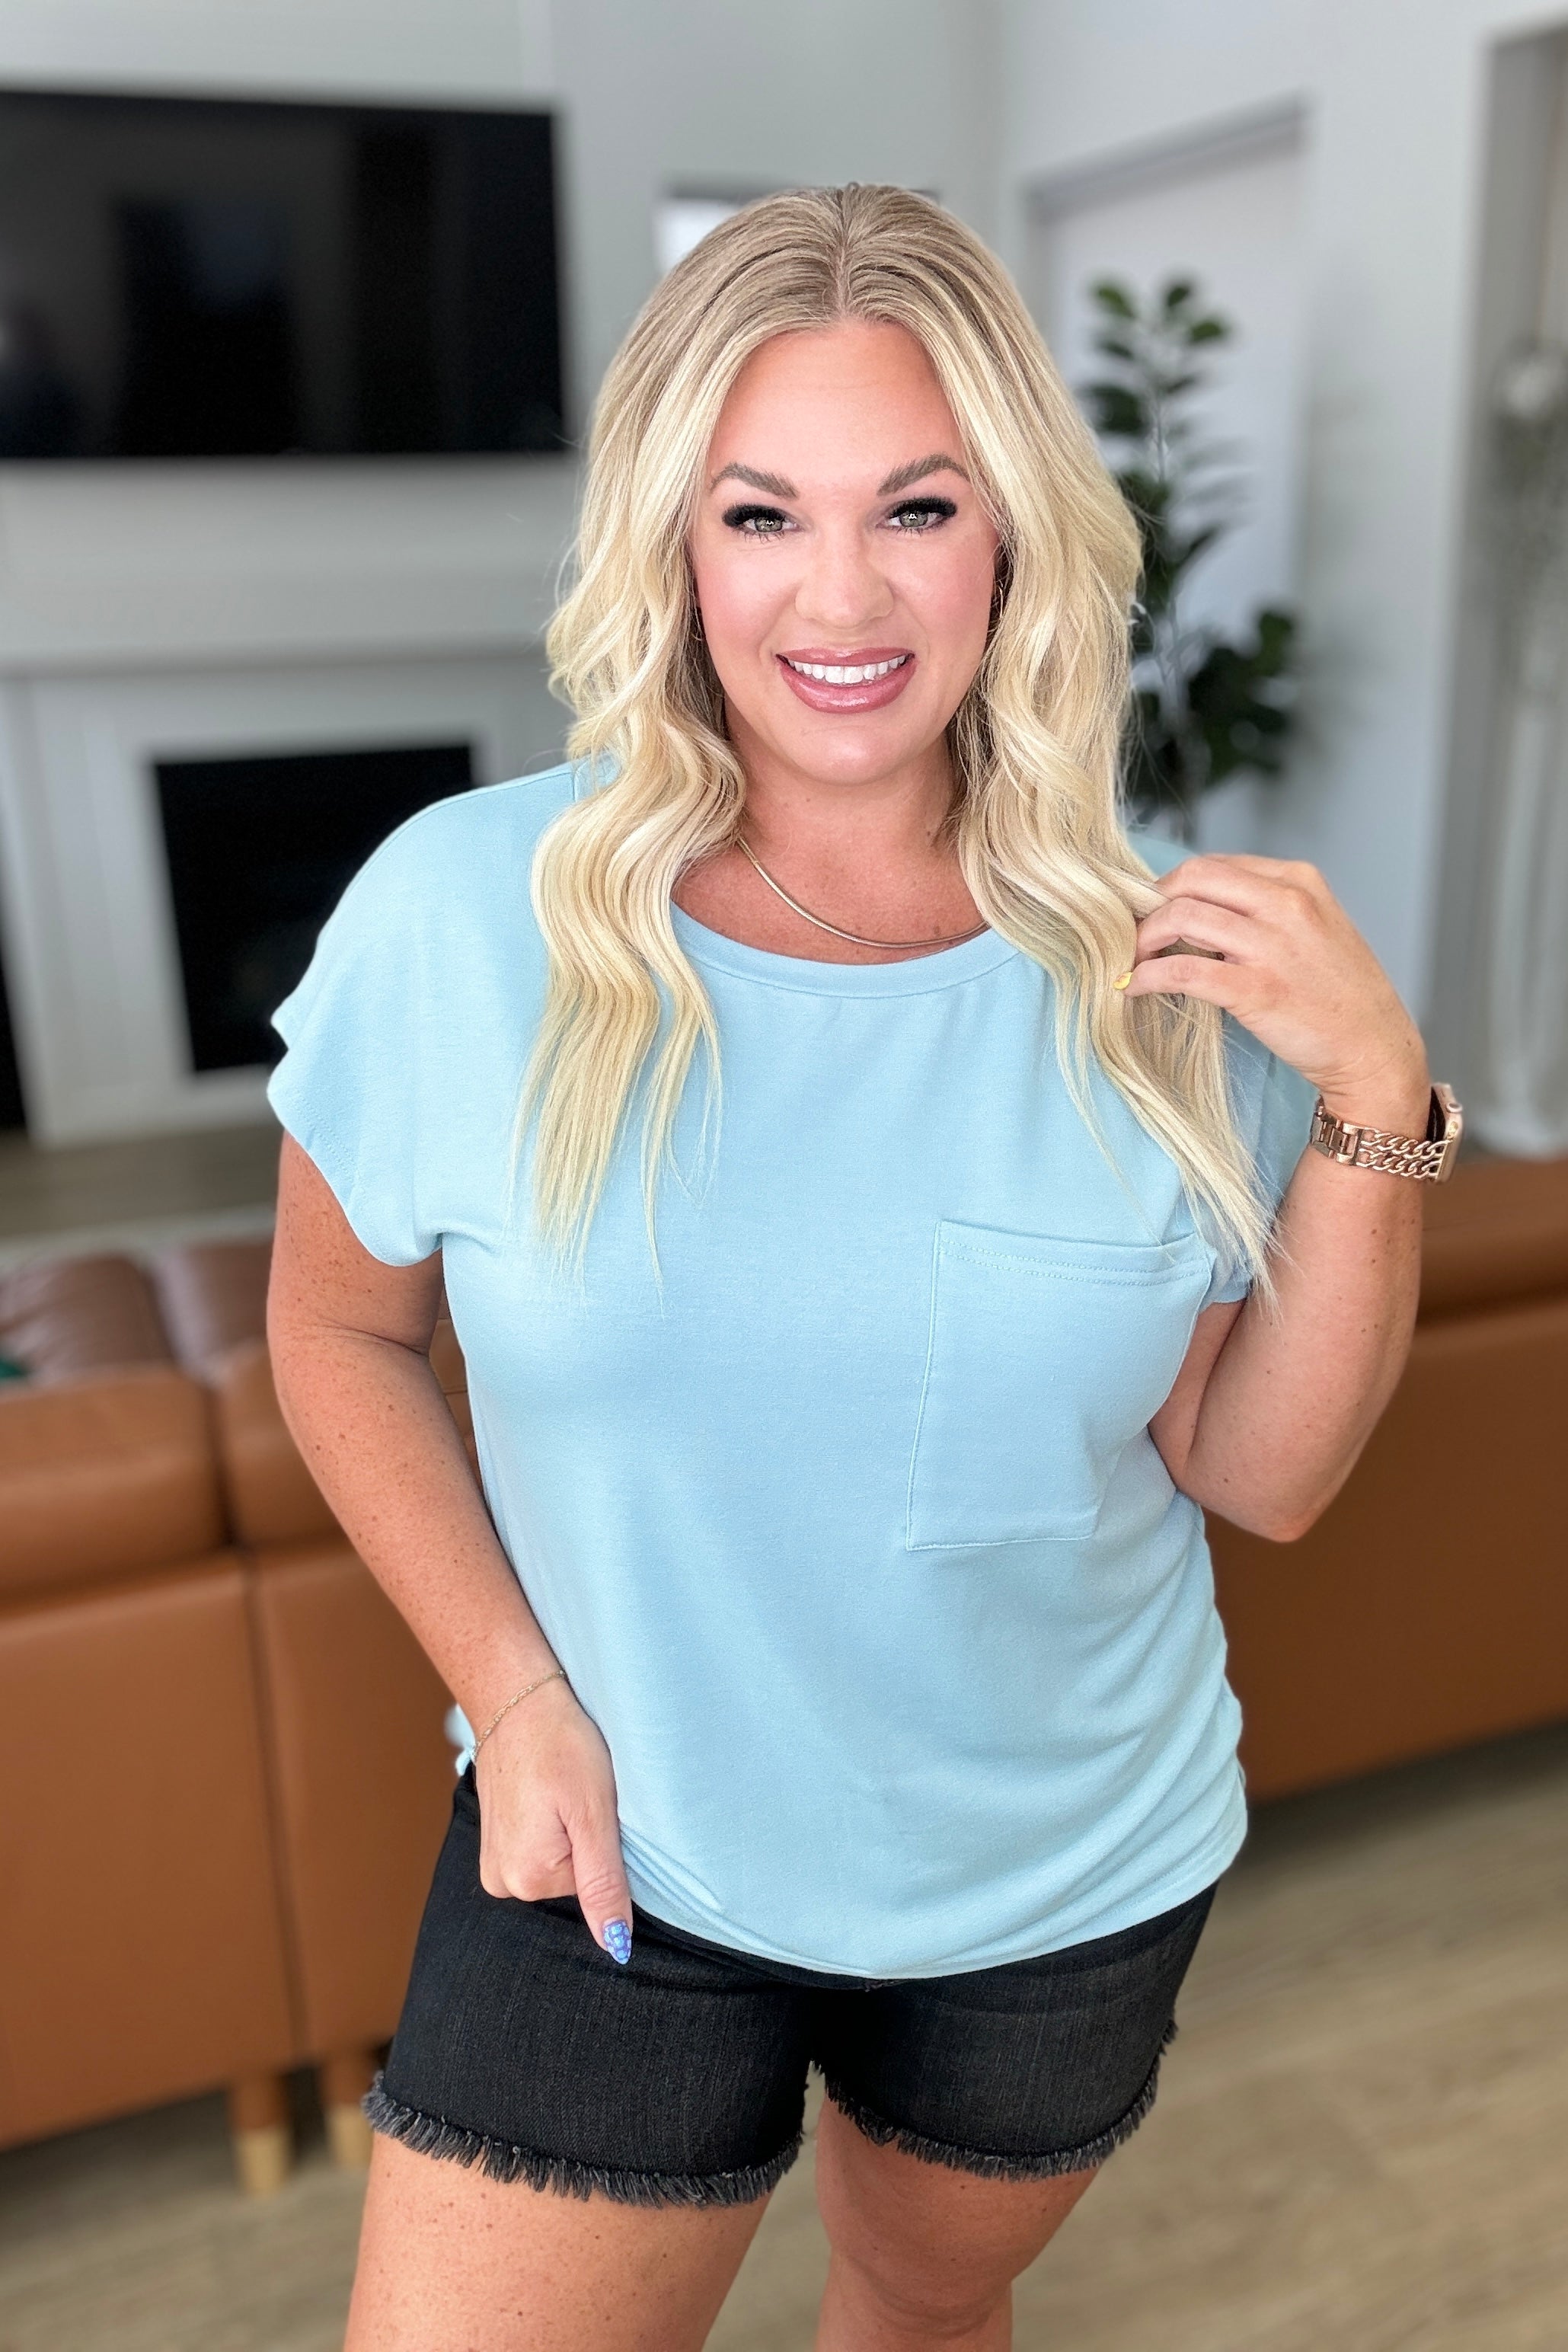 A woman with long blonde hair is smiling while standing indoors. She is wearing a light blue Not So Basic Pocket Tee in Blue by One Eleven North and dark denim shorts. She has a watch on her left wrist, and there is a brown sofa and green plant in the background.